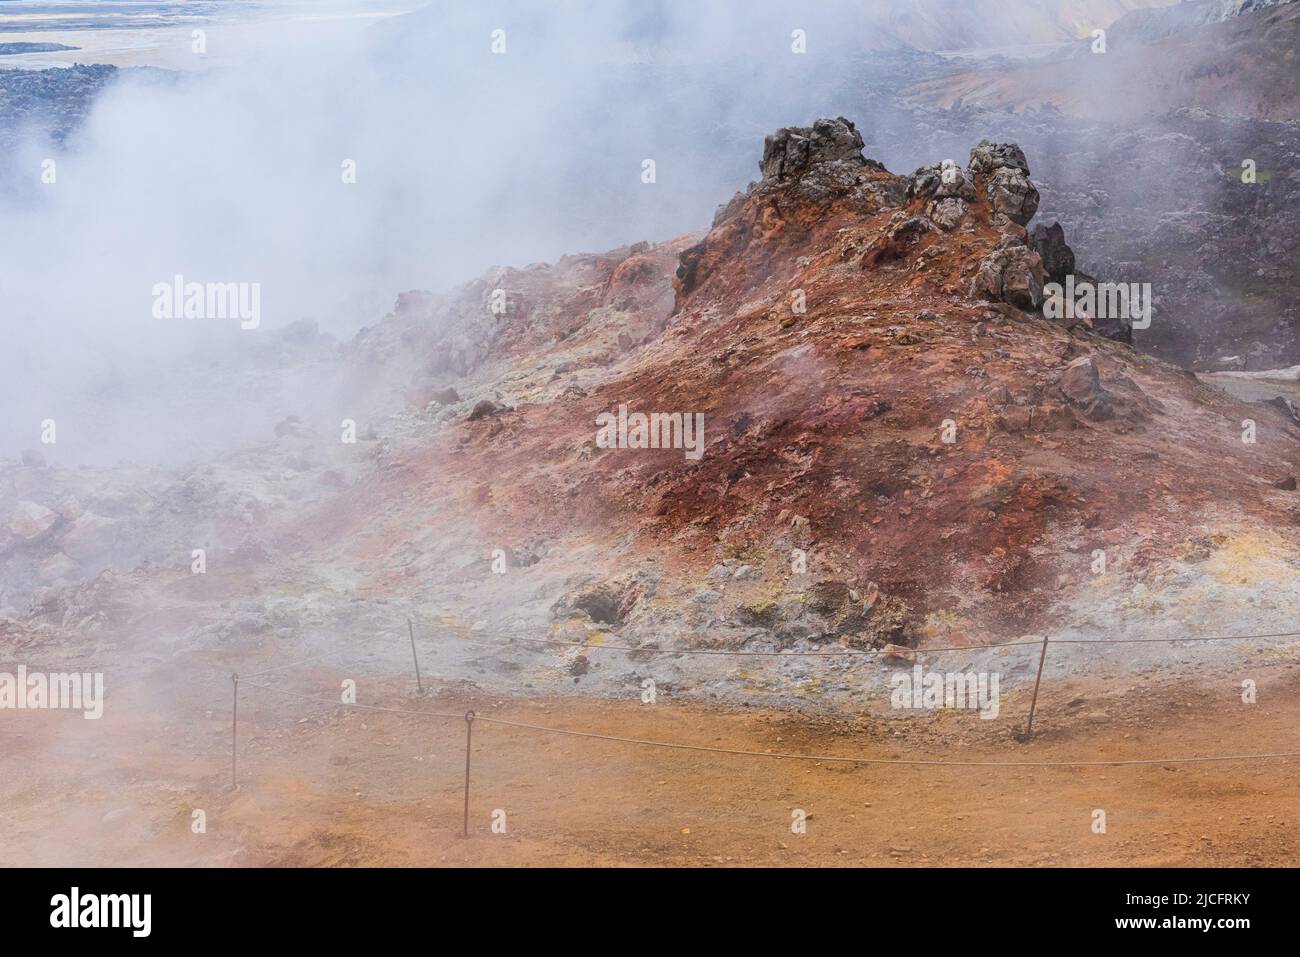 Laugavegur hiking trail is the most famous multi-day trekking tour in Iceland. Landscape photo from the area around Landmannalaugar, starting point of the long-distance hiking trail in the highlands of Iceland. Geothermal spring. Stock Photo